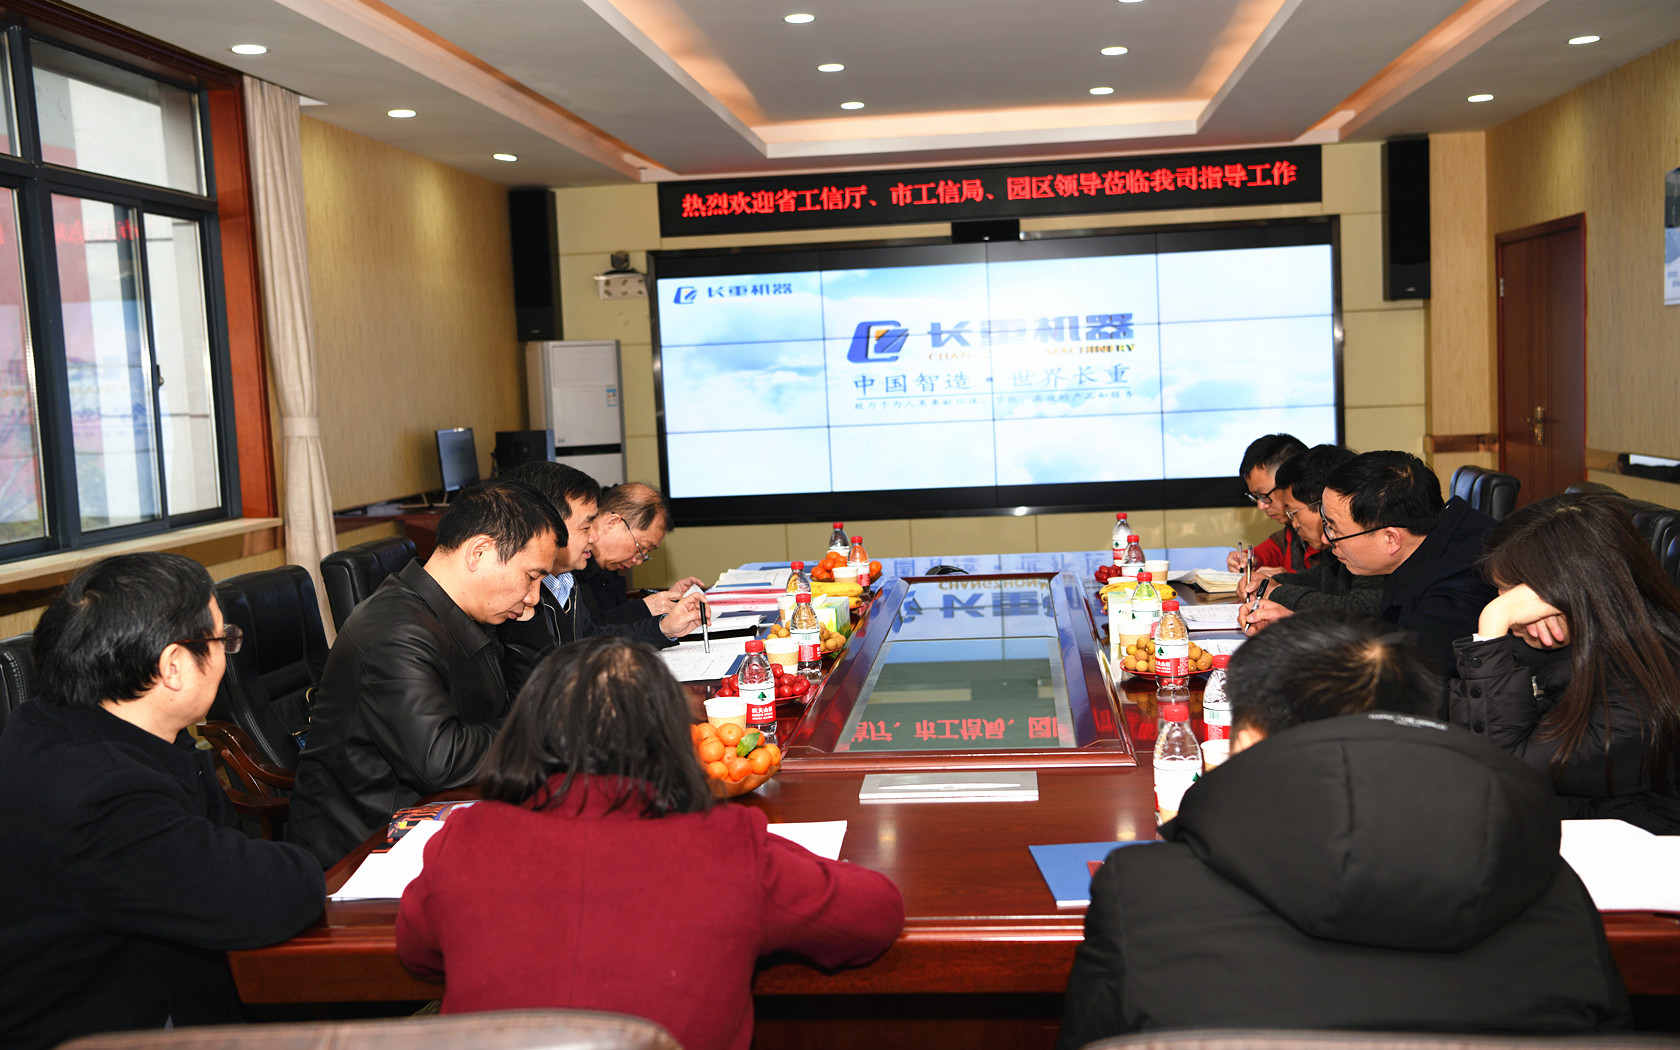 Leaders of the Provincial Department of Industry and Information Technology and the Municipal Bureau of Industry and Information Technology visited our company for research and guidance